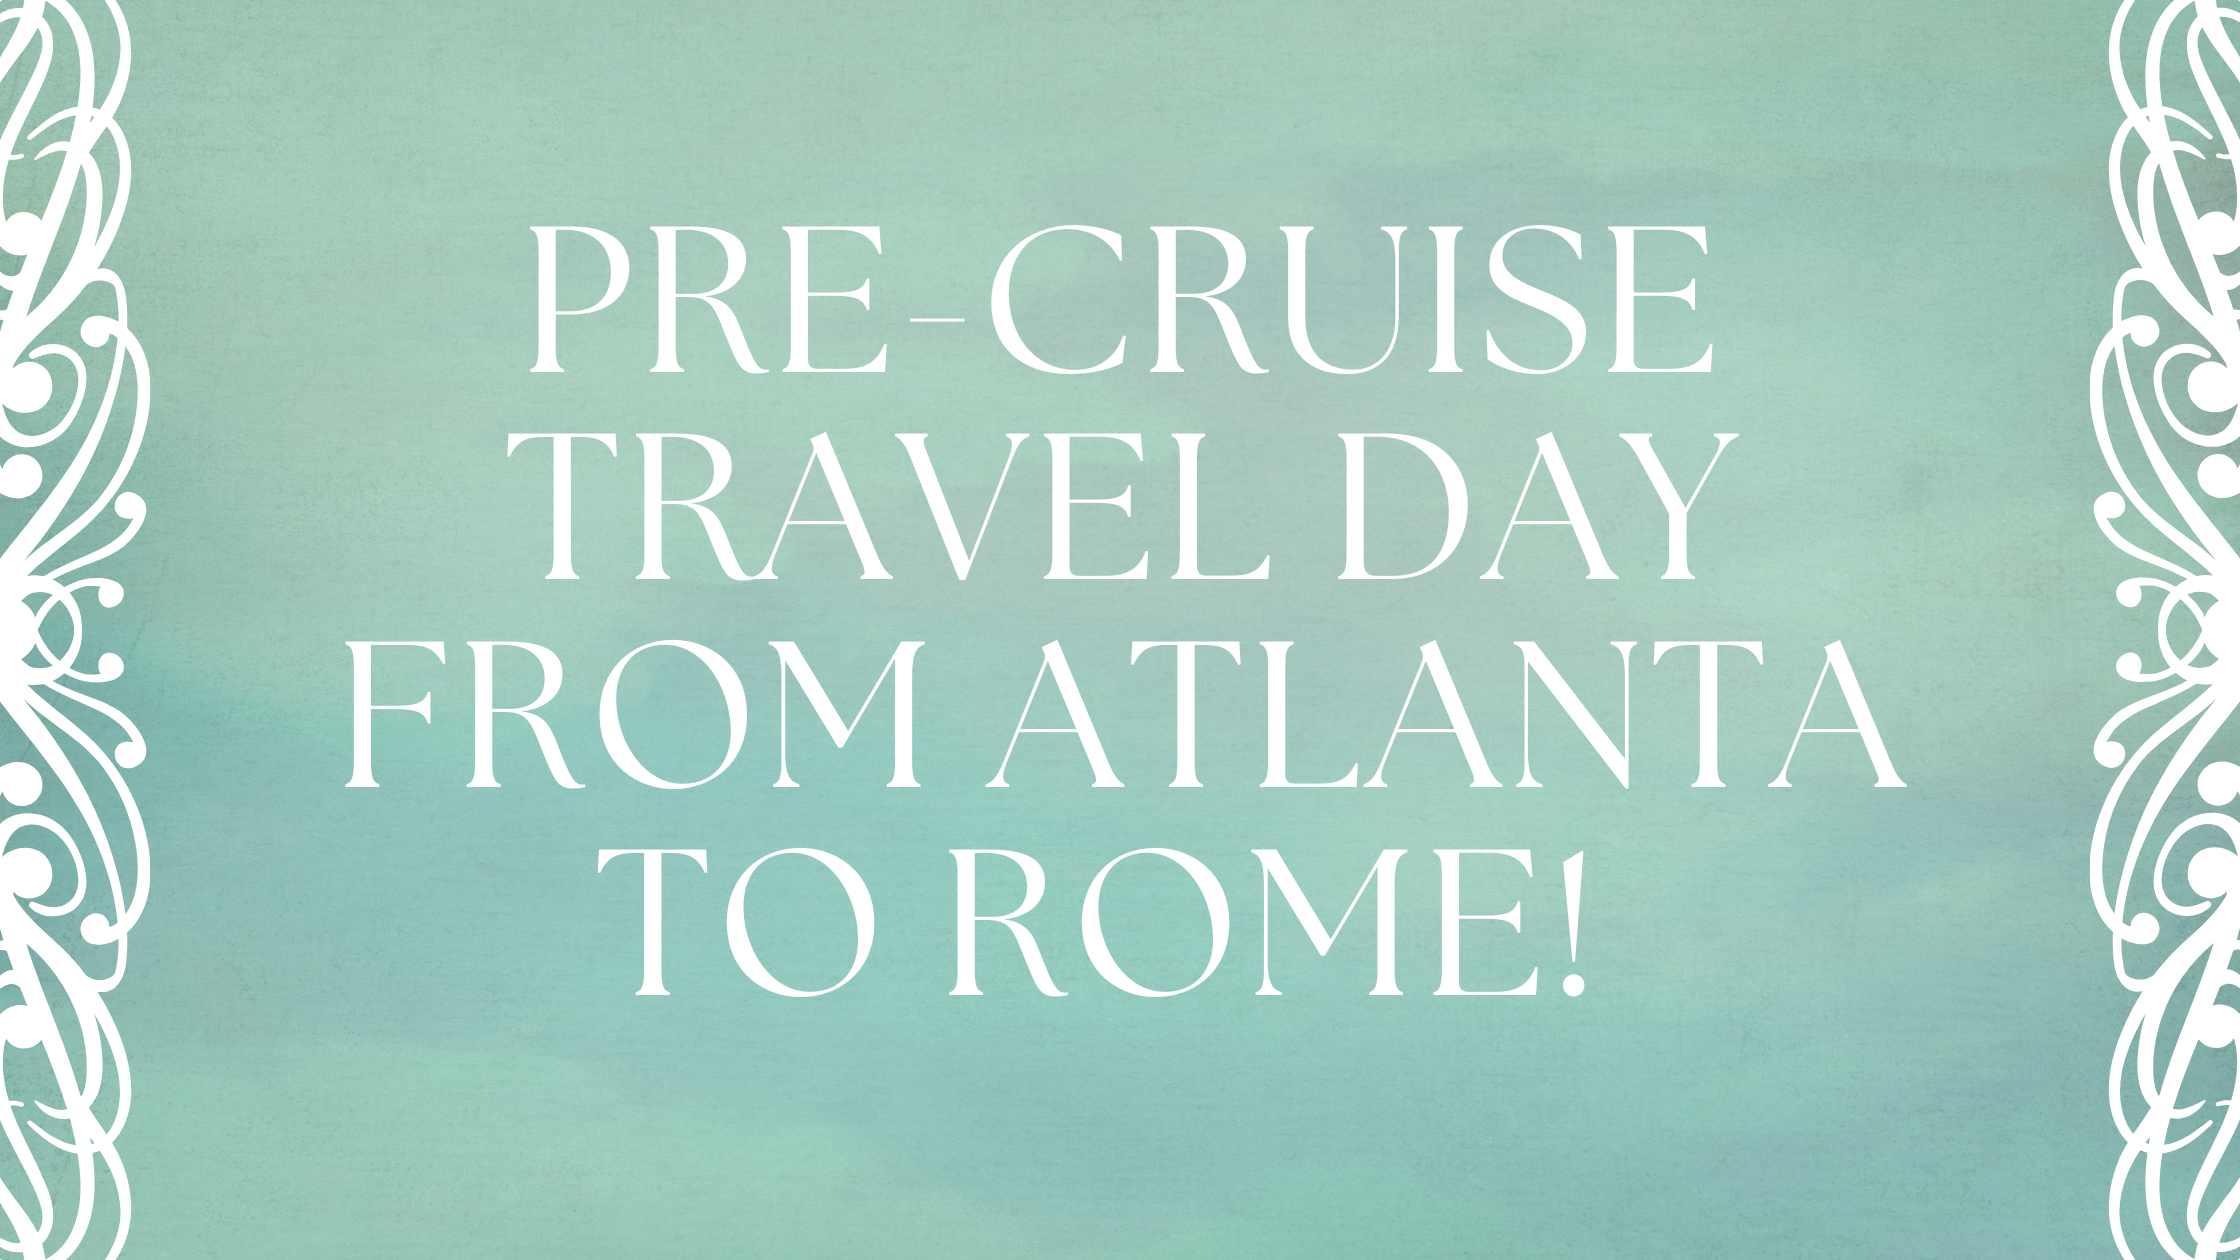 Pre-Cruise Travel Day From Atlanta to Rome!